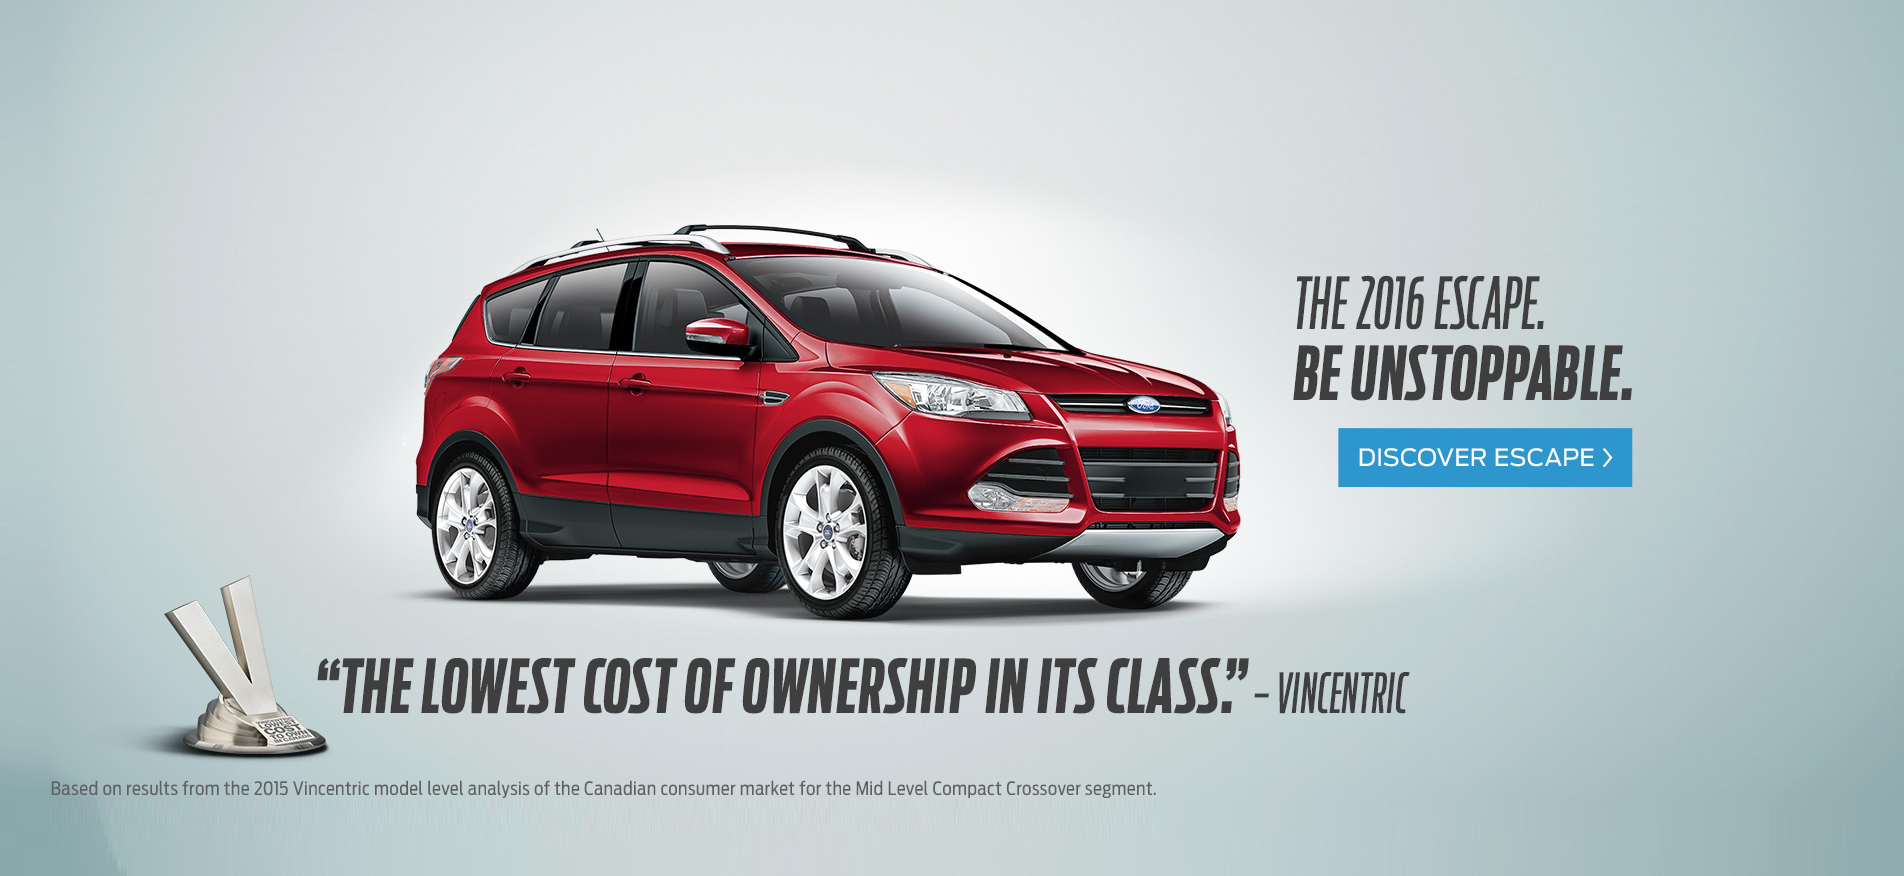 Brant county ford used cars